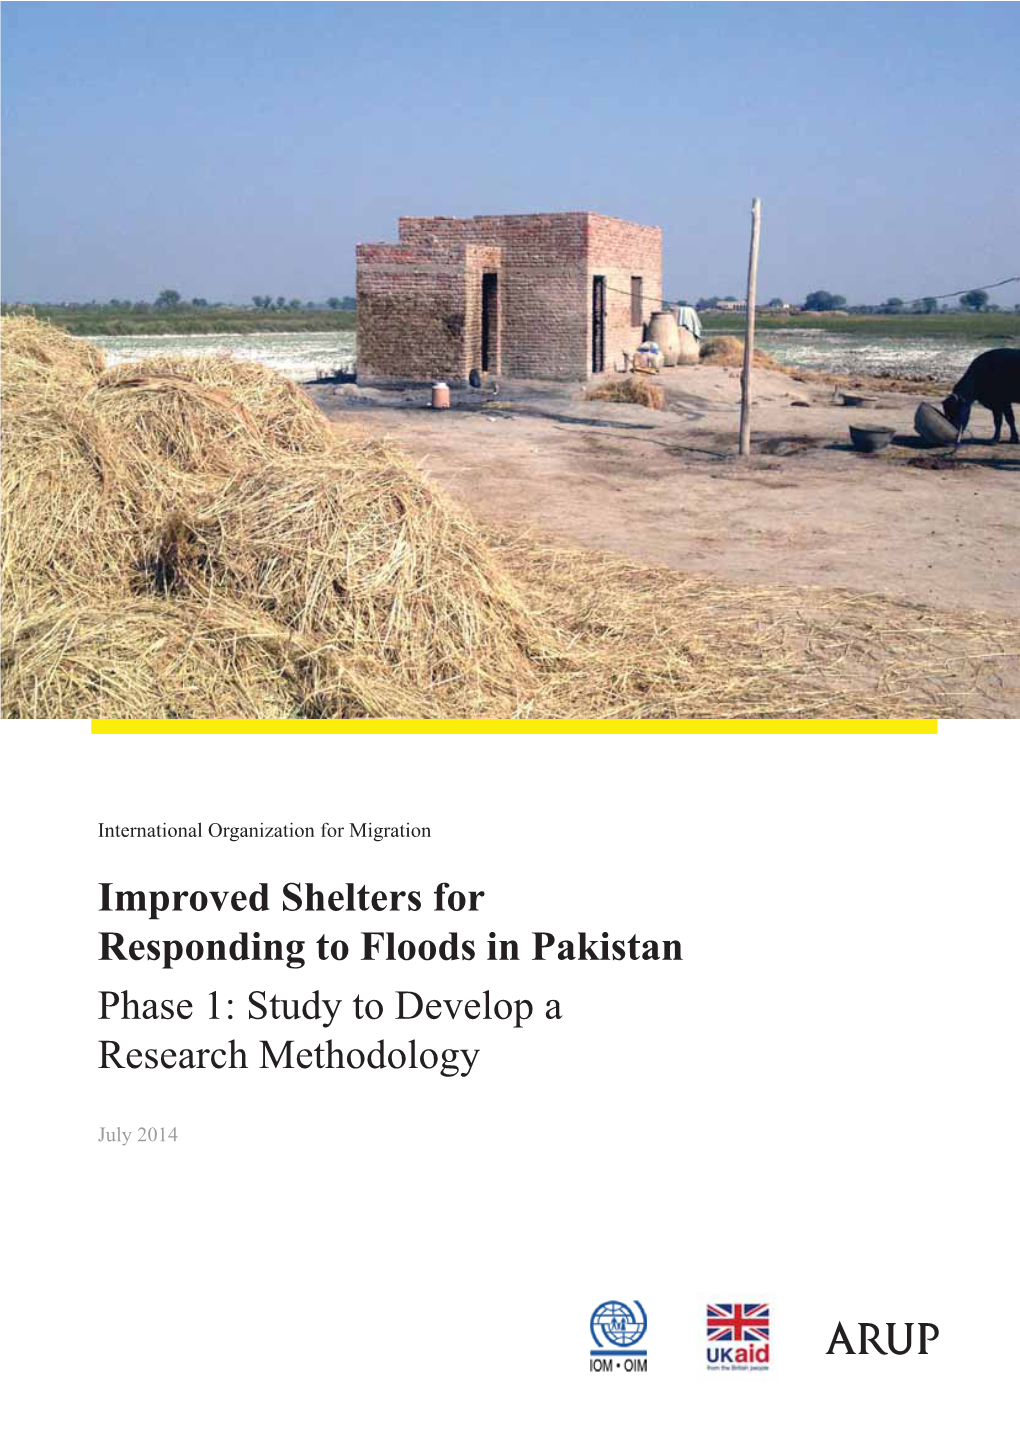 Improved Shelters for Responding to Floods in Pakistan. Phase 1